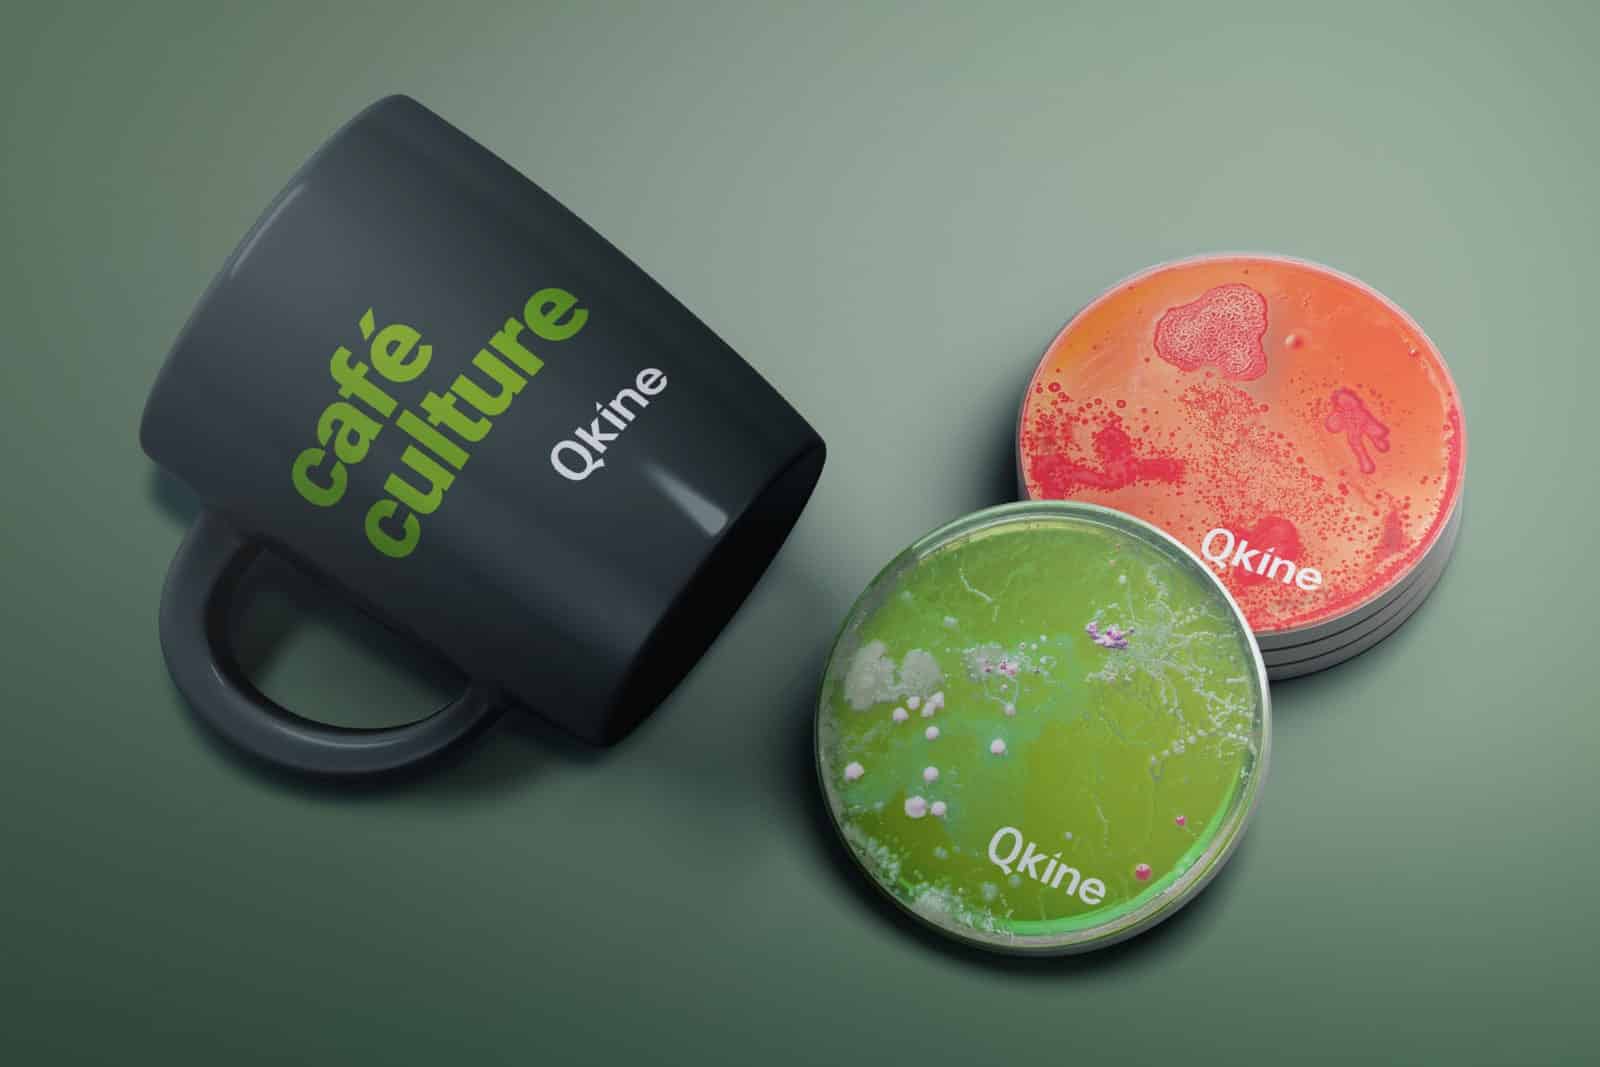 Cambridge University spin-out science branding